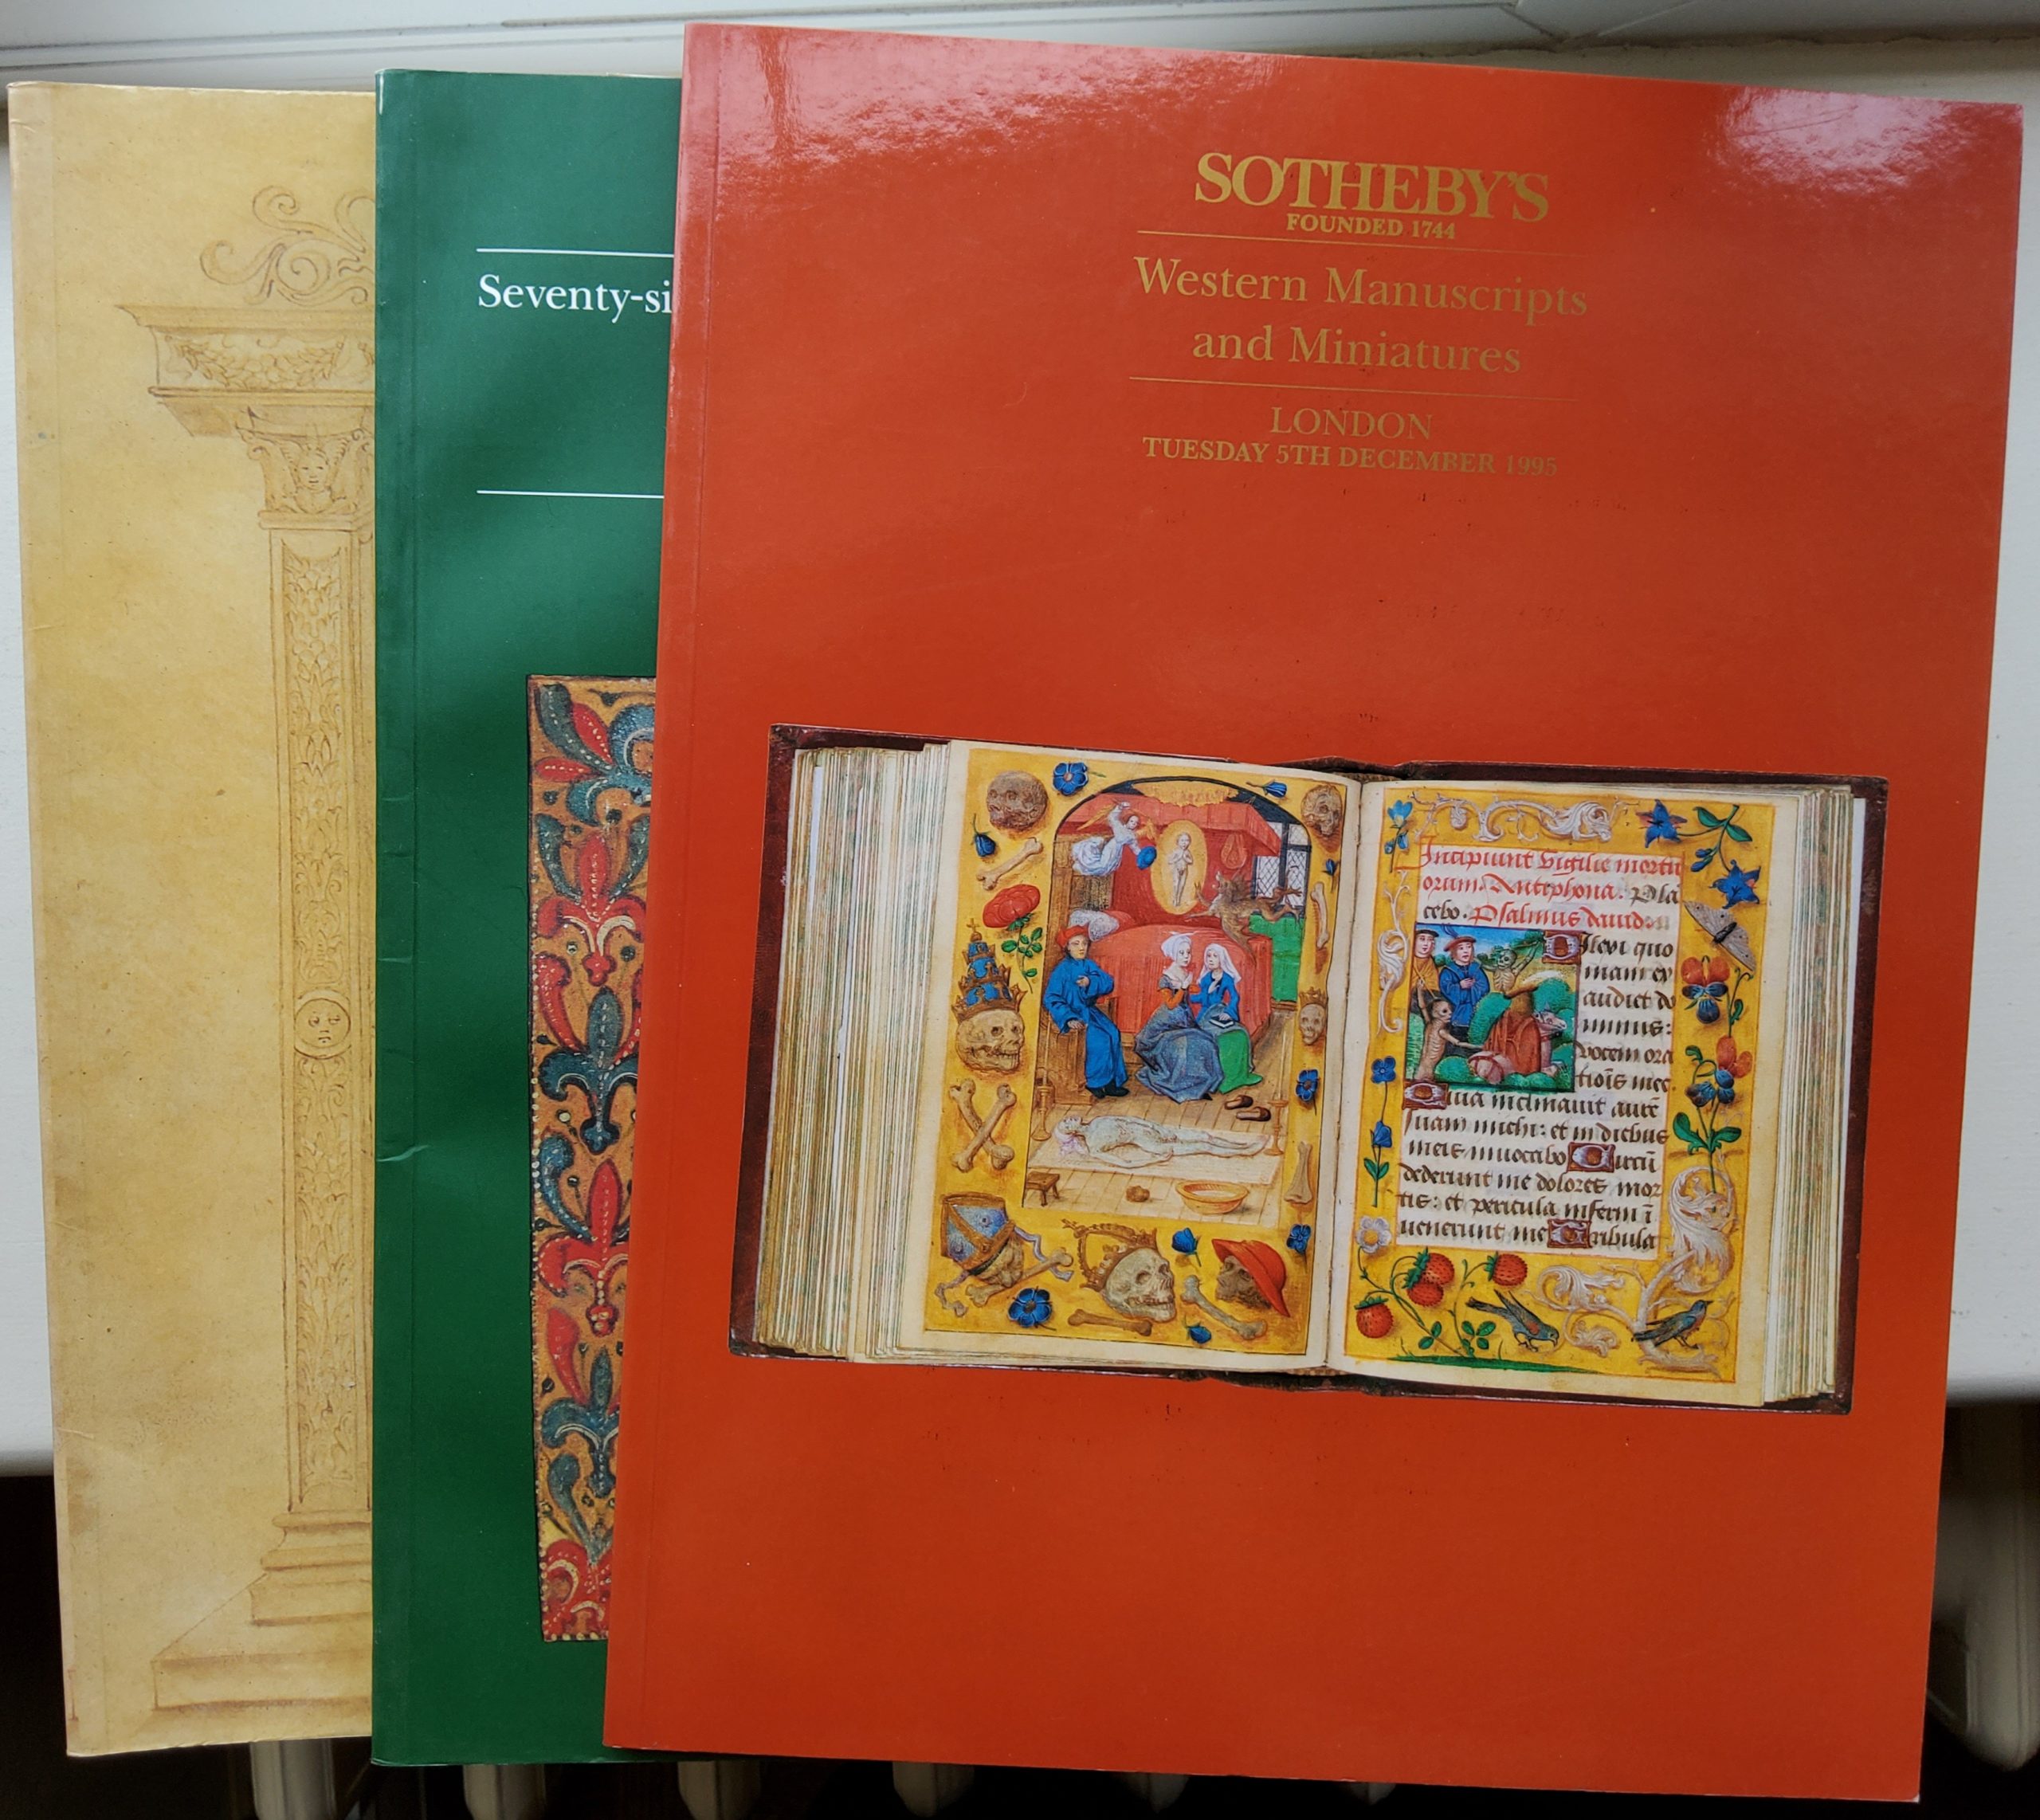 Sotheby’s Catalogues of Western Manuscripts and Miniatures; 10 vols. 1990-1995.